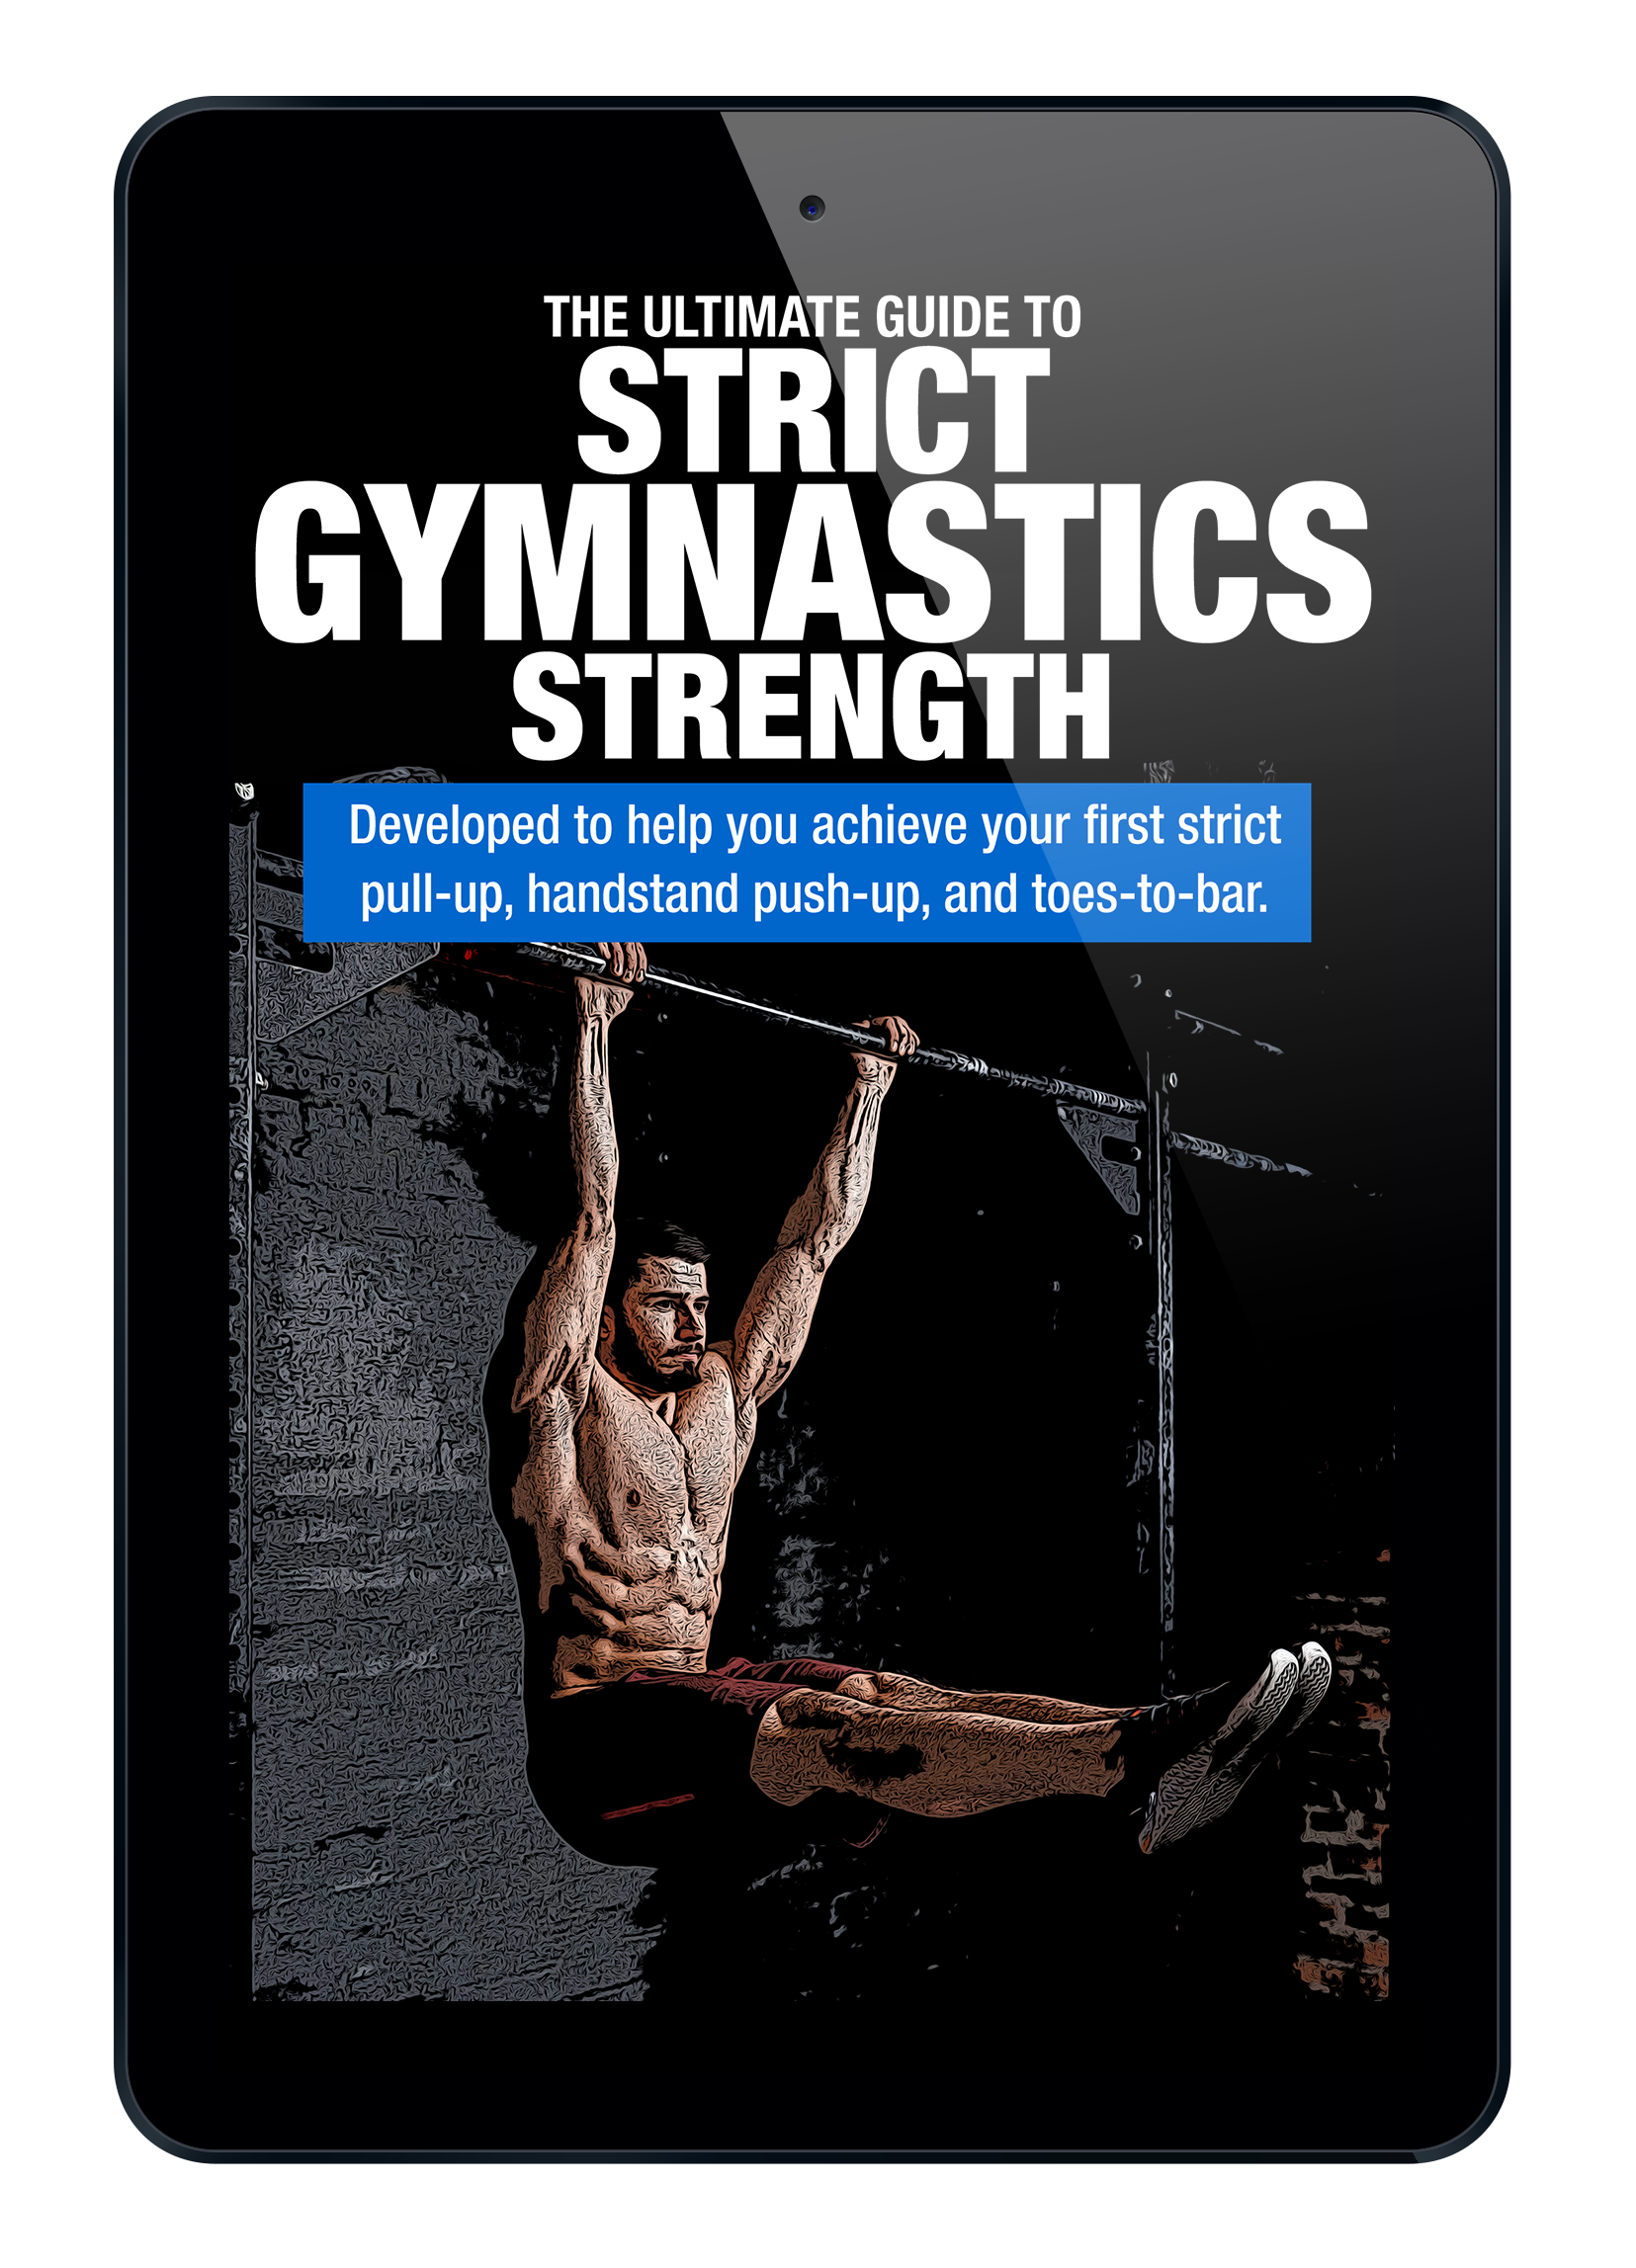 The Ultimate Guide to Strict Gymnastics Strength